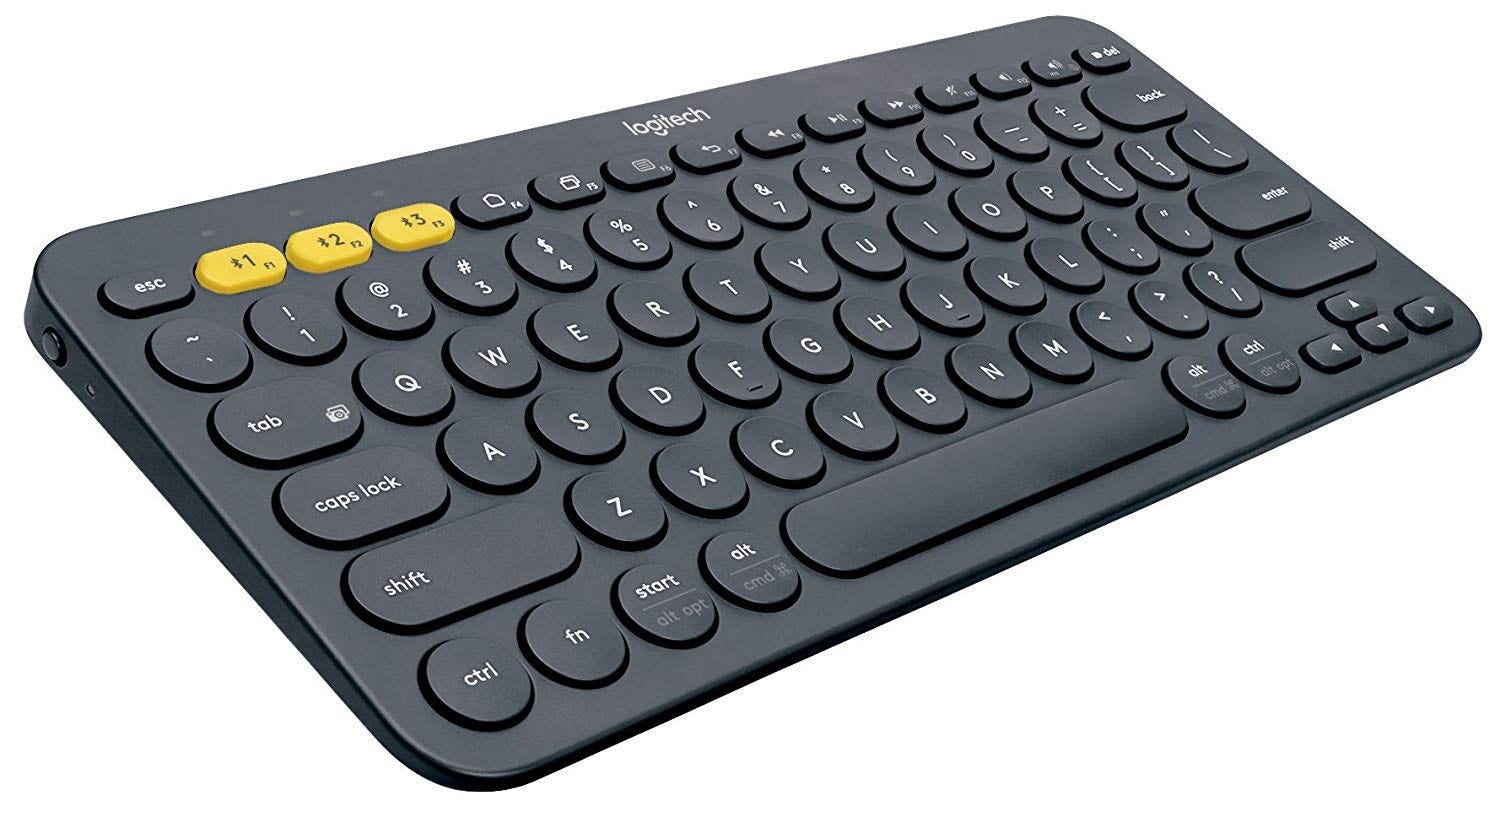 The Logitech K380 keyboard, from the front.